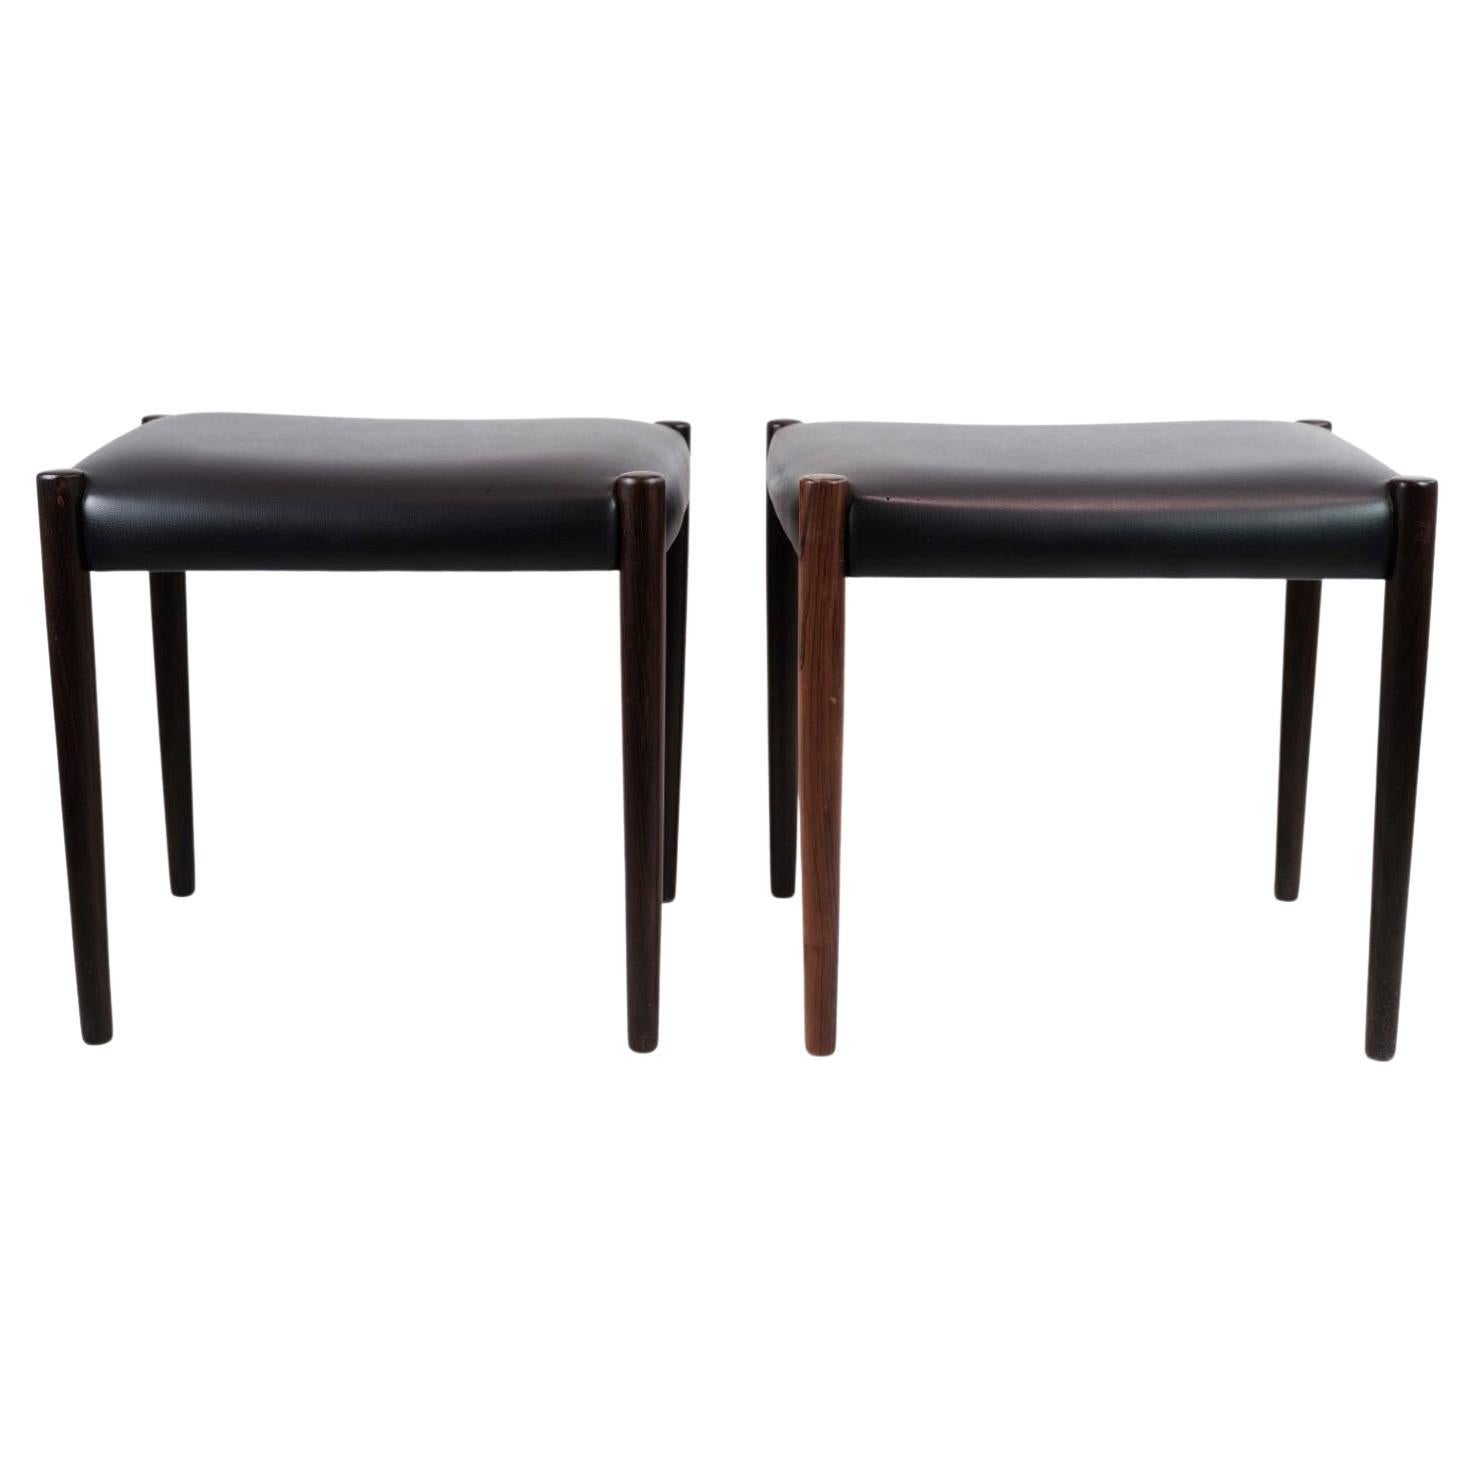 Set Of 2 Stools Made In Rosewood & Black Leather Seat From 1960s For Sale